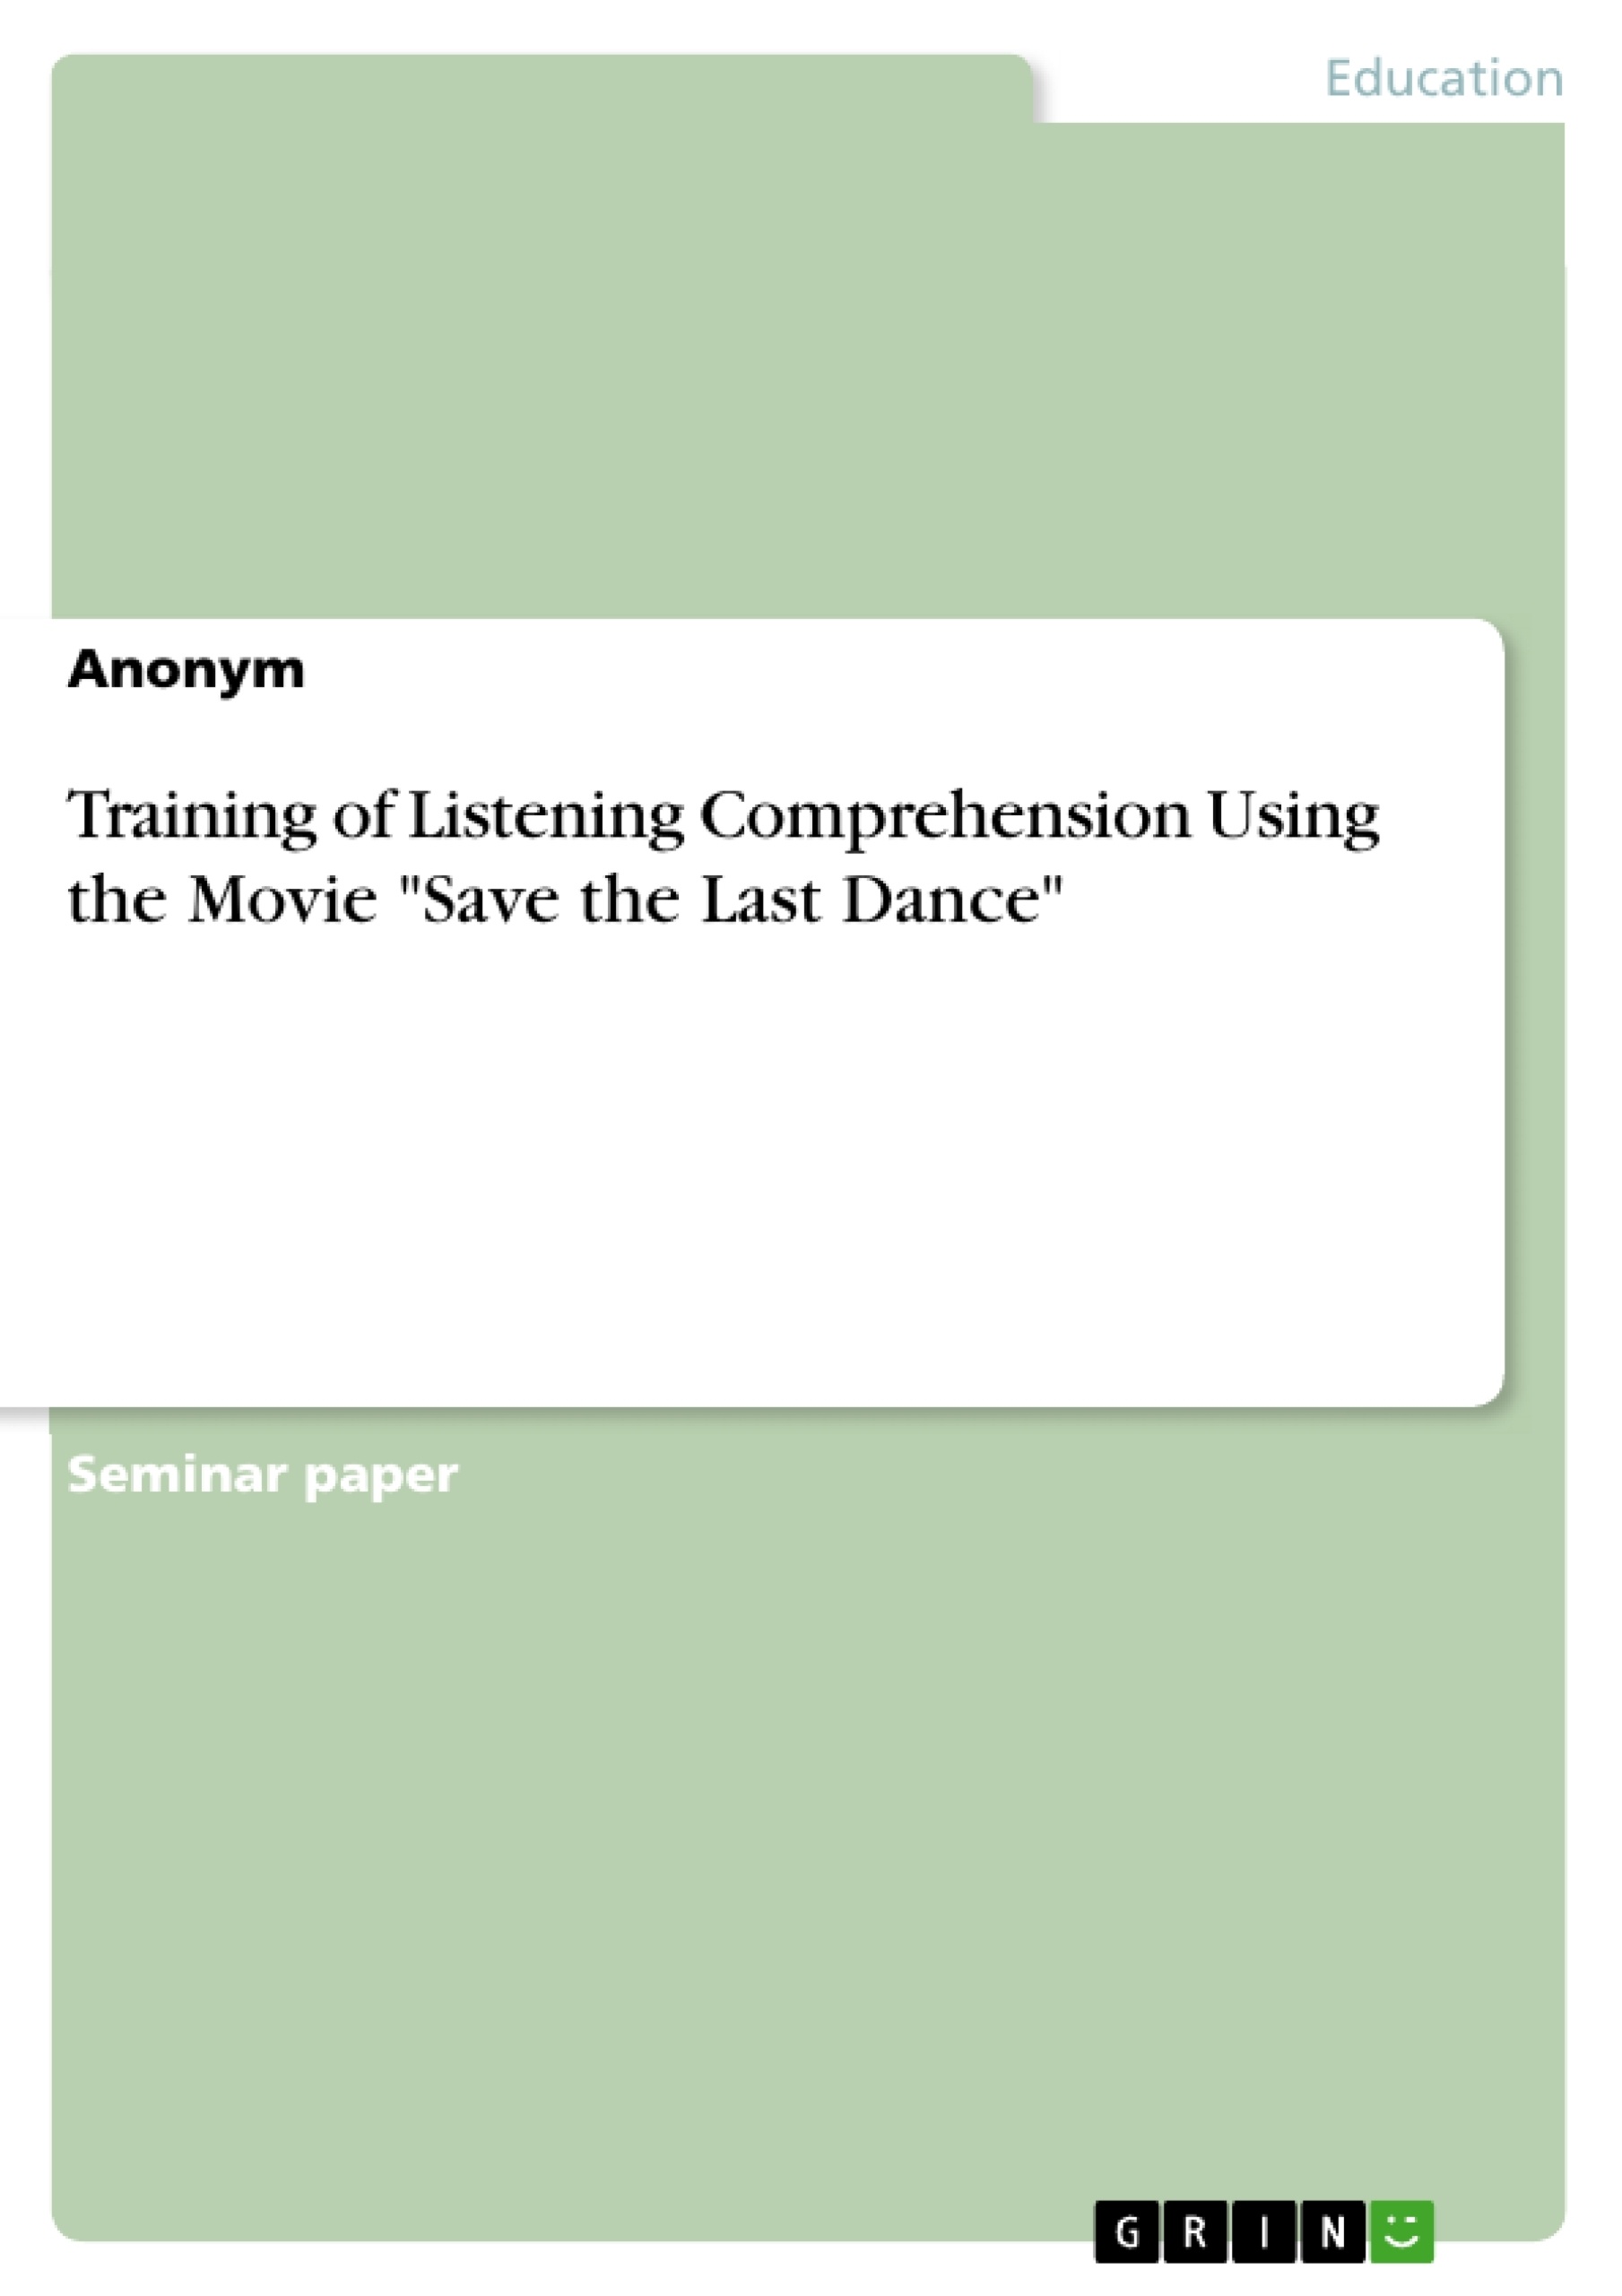 Title: Training of Listening Comprehension Using the Movie "Save the Last Dance"